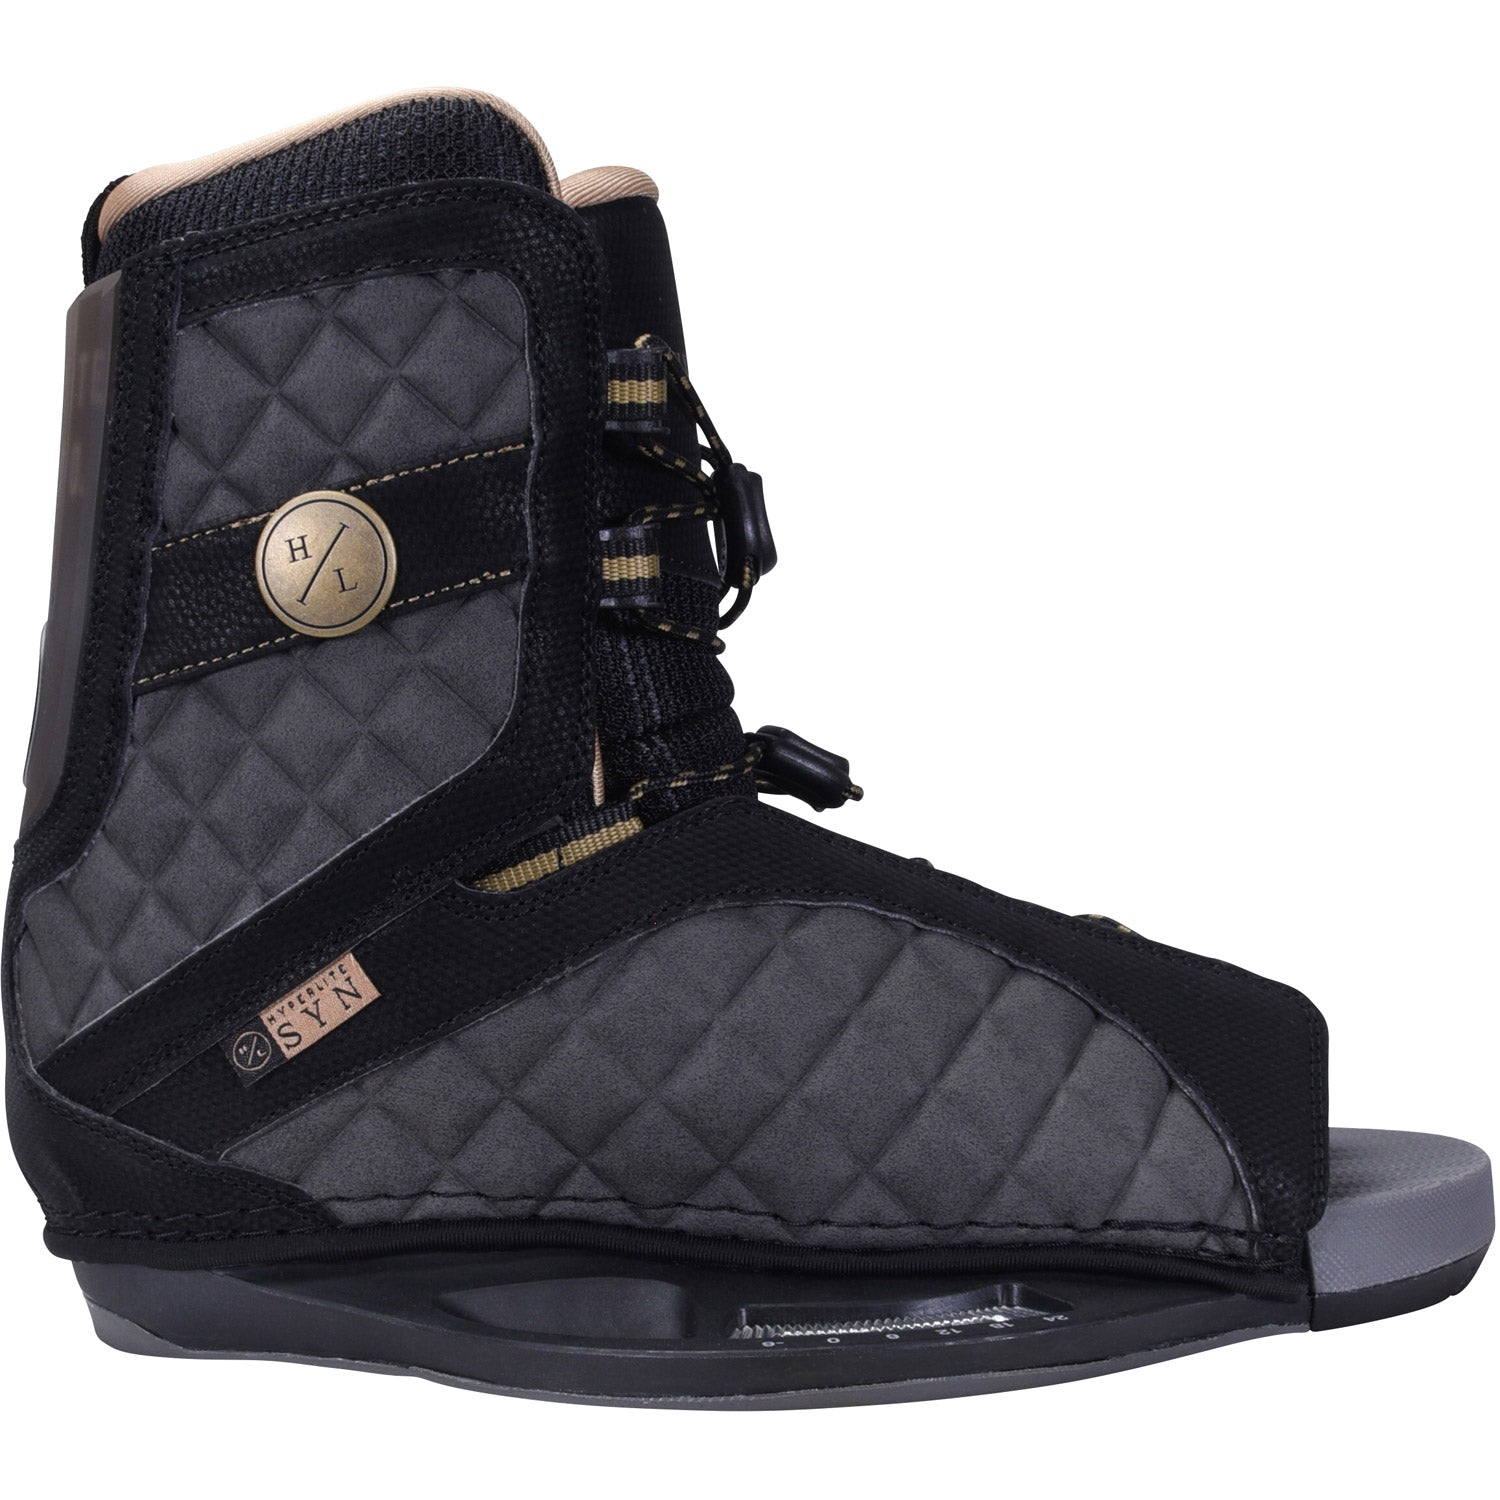 Syn OT Wakeboard Boots